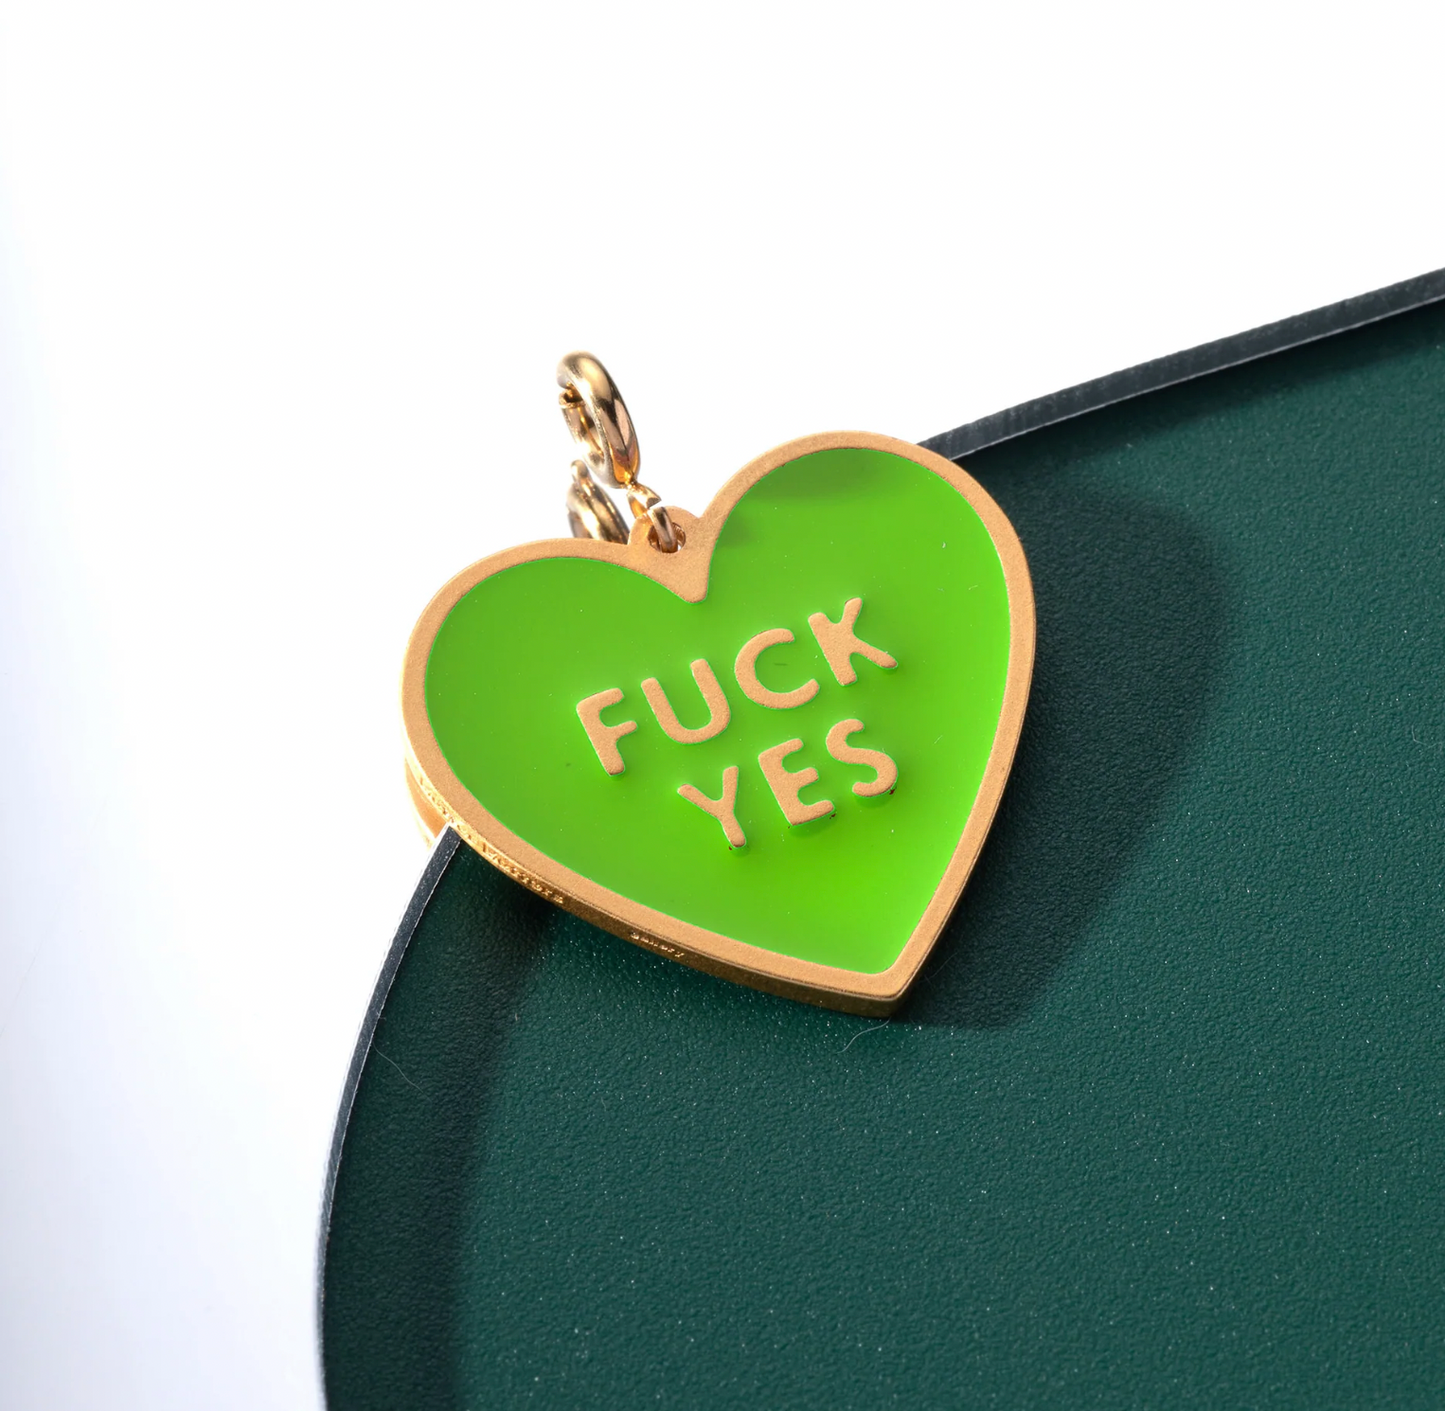 Matter Matters Fuck Yes Enamel Necklace • Bright Green / Reversible